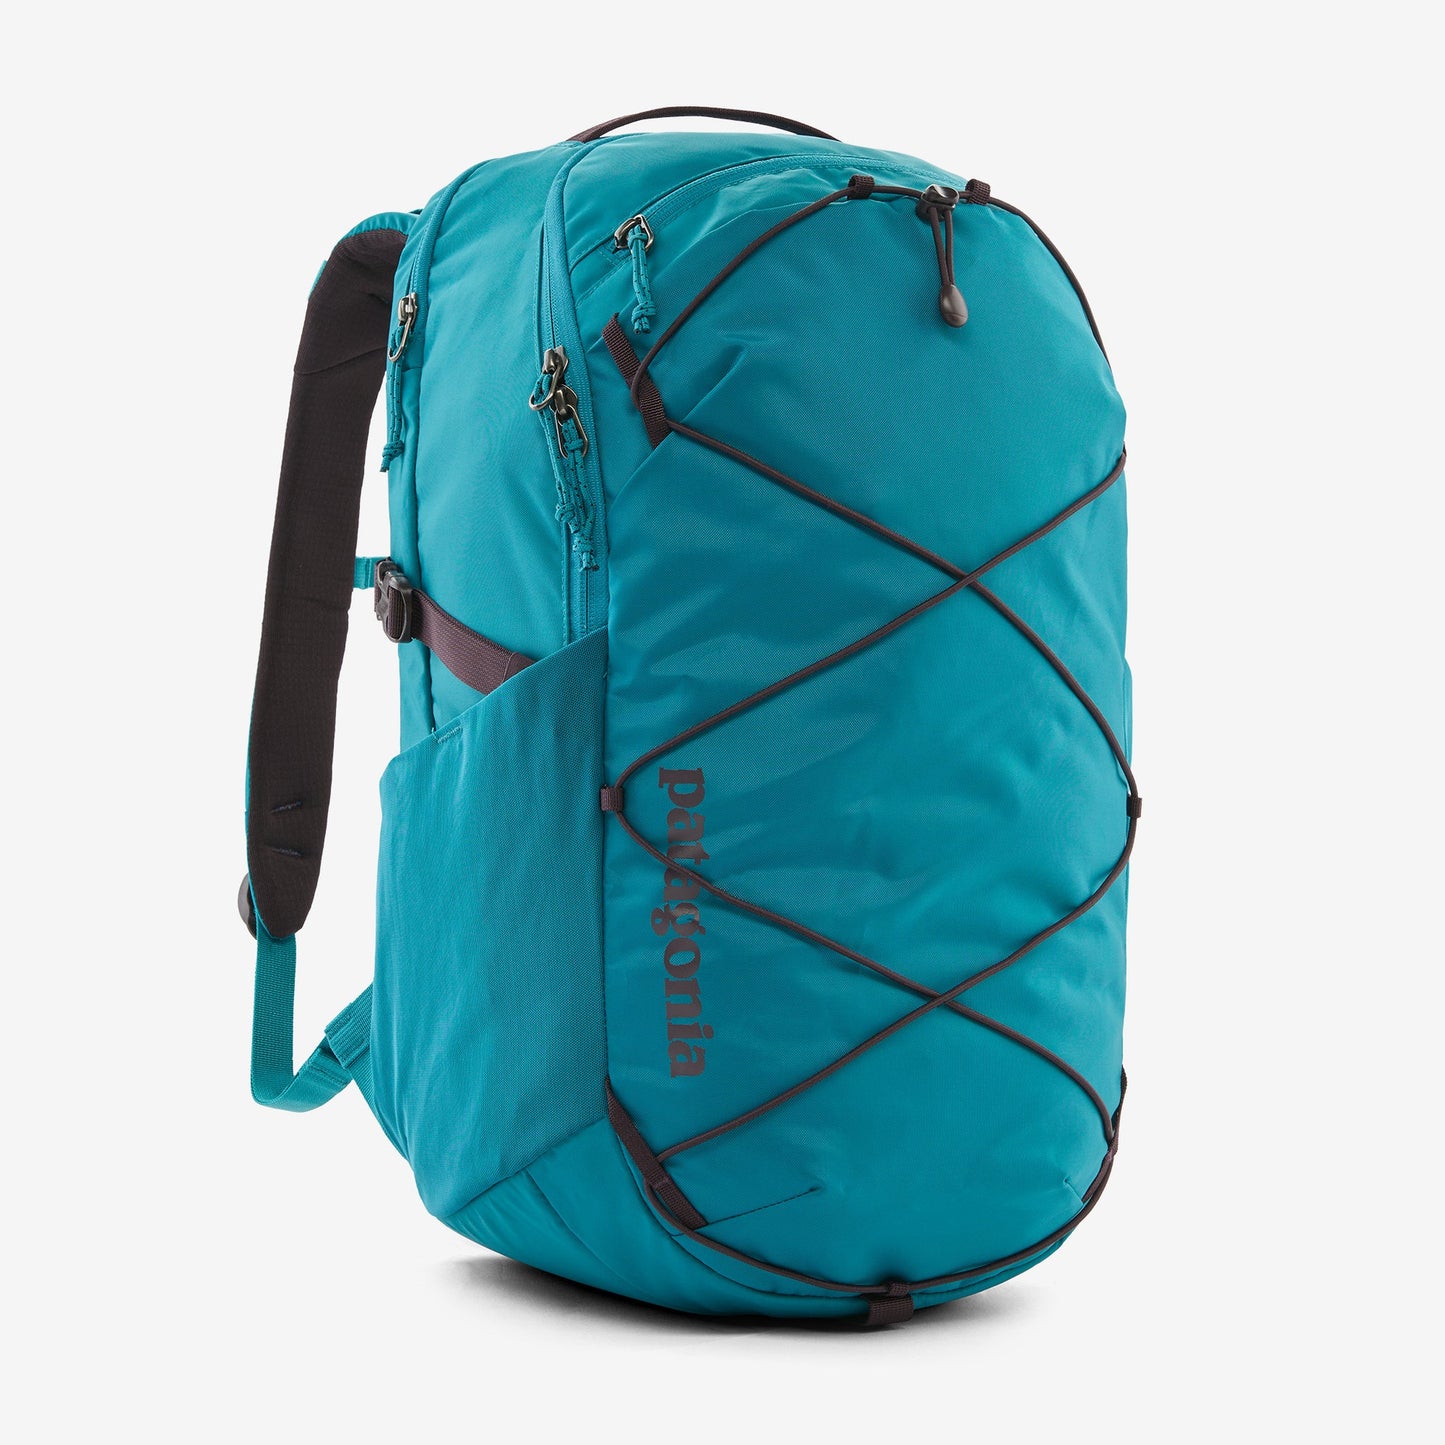 Patagonia Refugio Day Pack/Backpack 30L